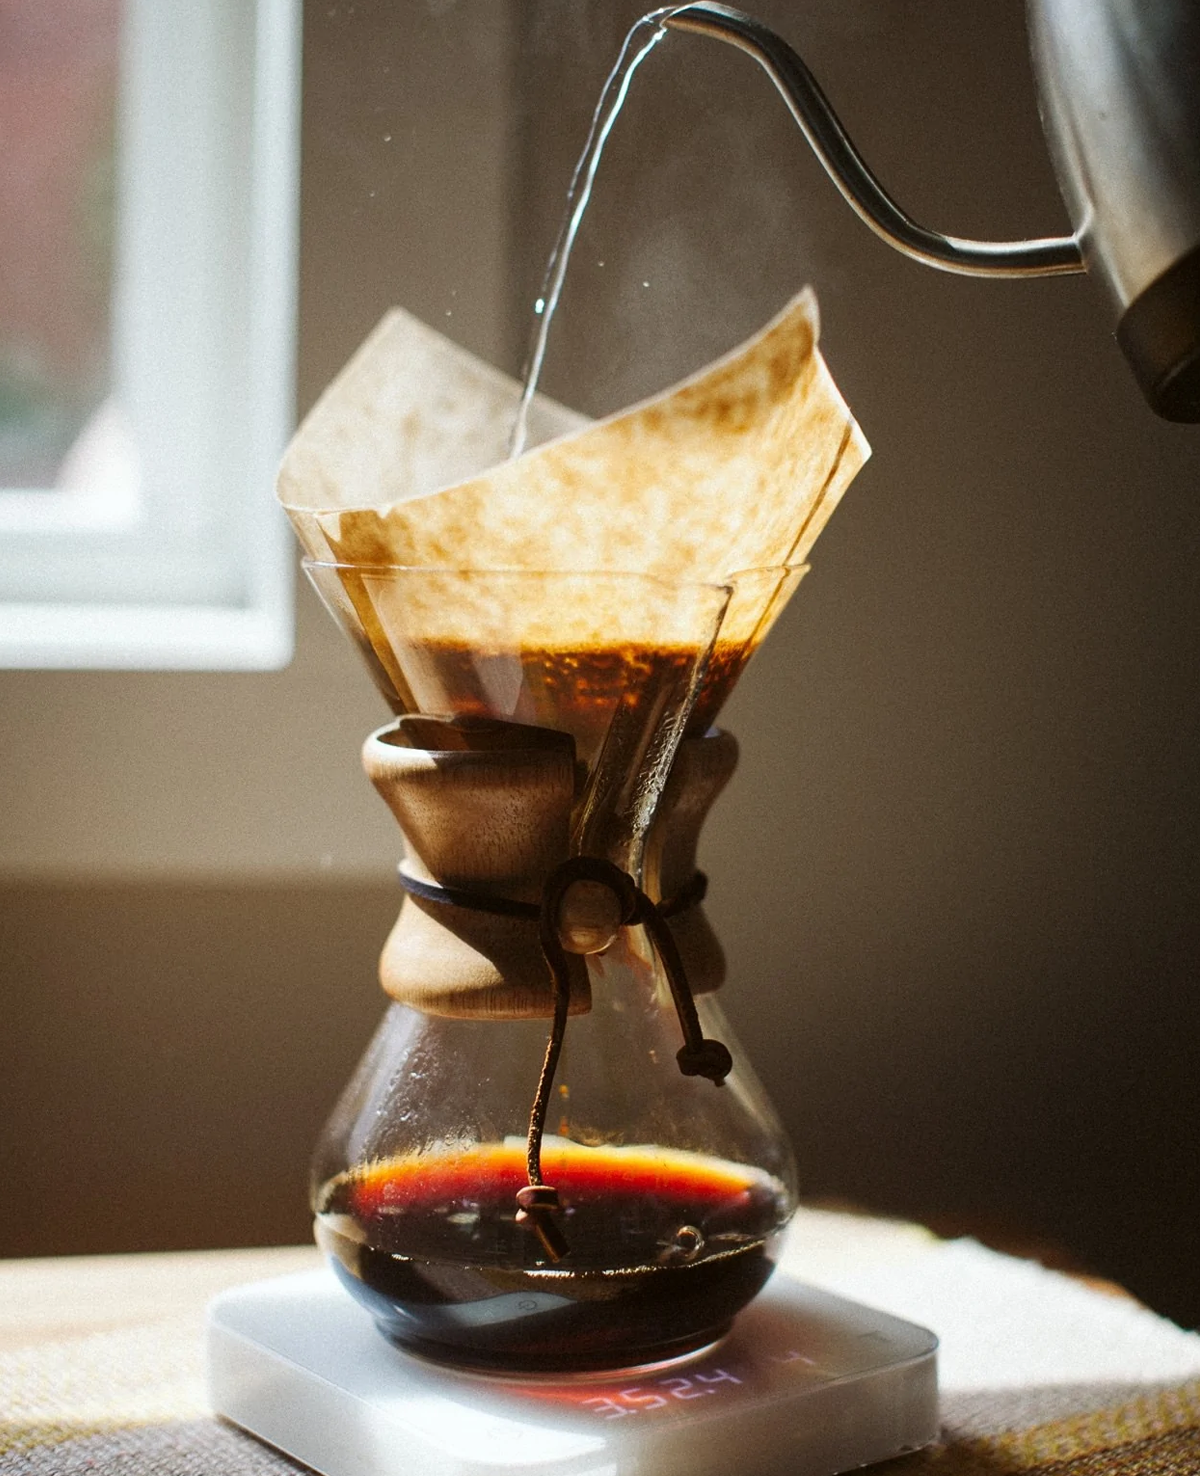 5 tips to brewing better coffee at home!